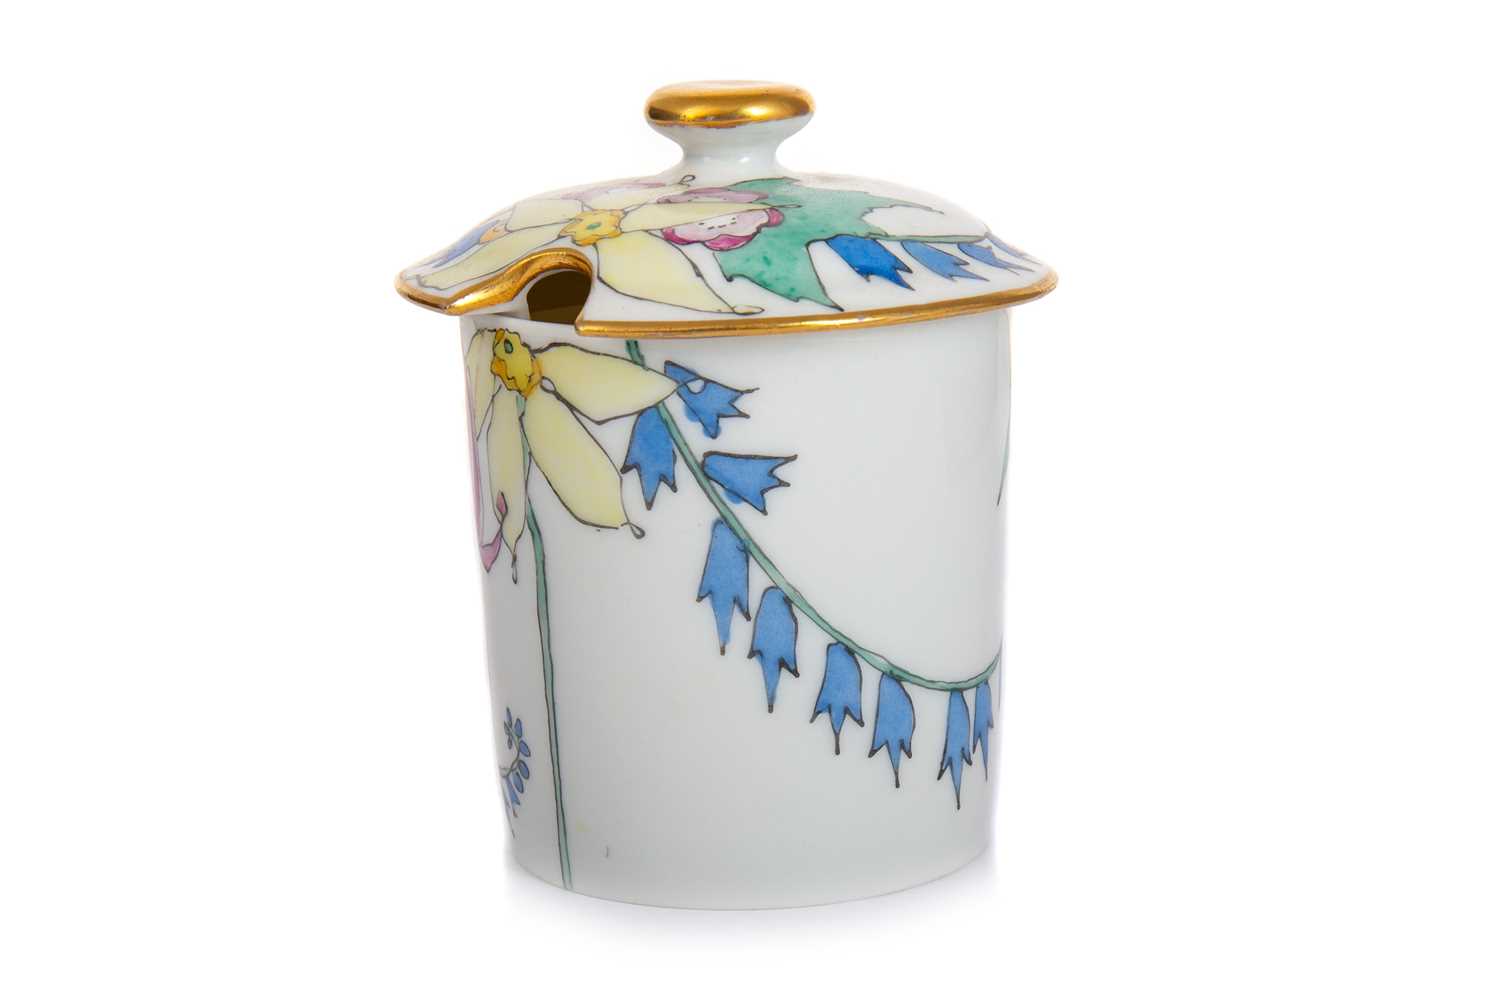 ELIZABETH MARY WATT (1886-1954), PORCELAIN PRESERVE JAR AND COVER, EARLY TO MID-20TH CENTURY